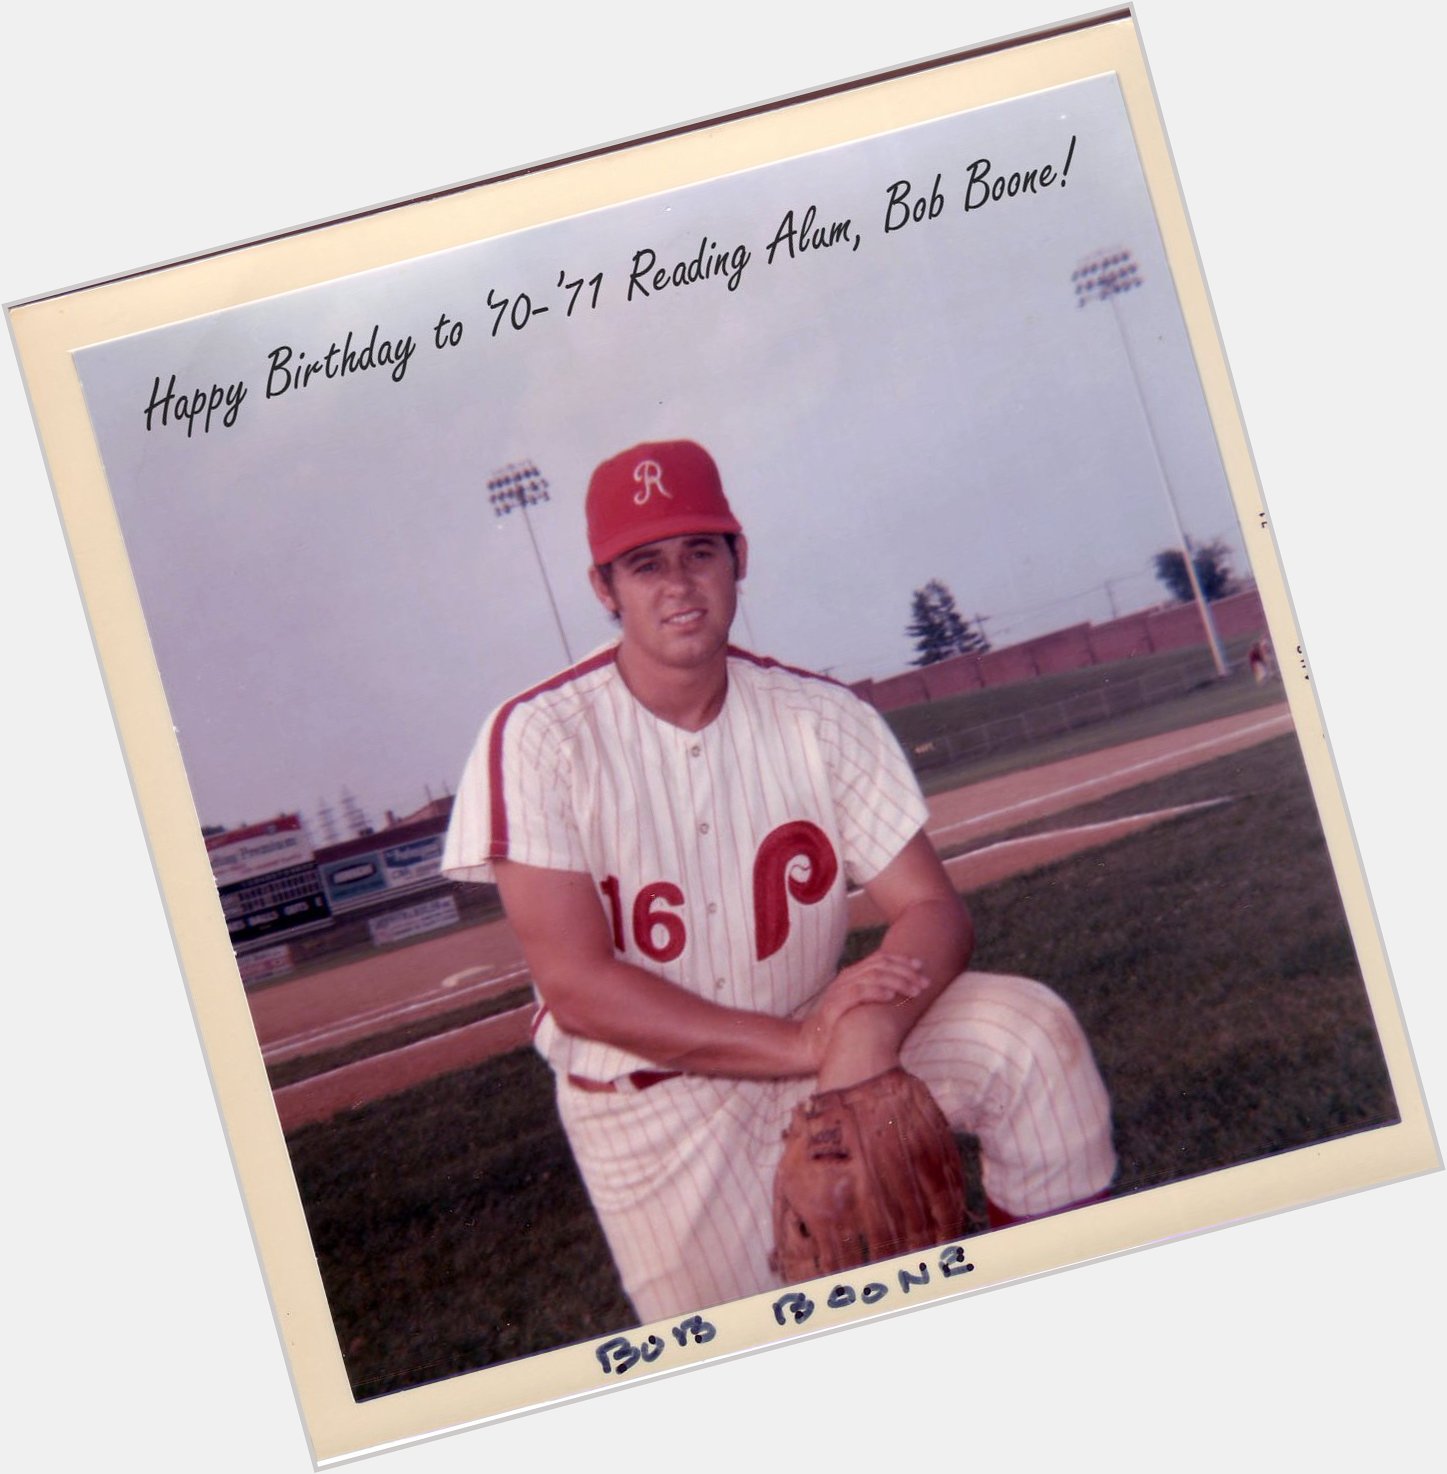 Happy Birthday to Reading Phillies alums Bob Boone and       ! 